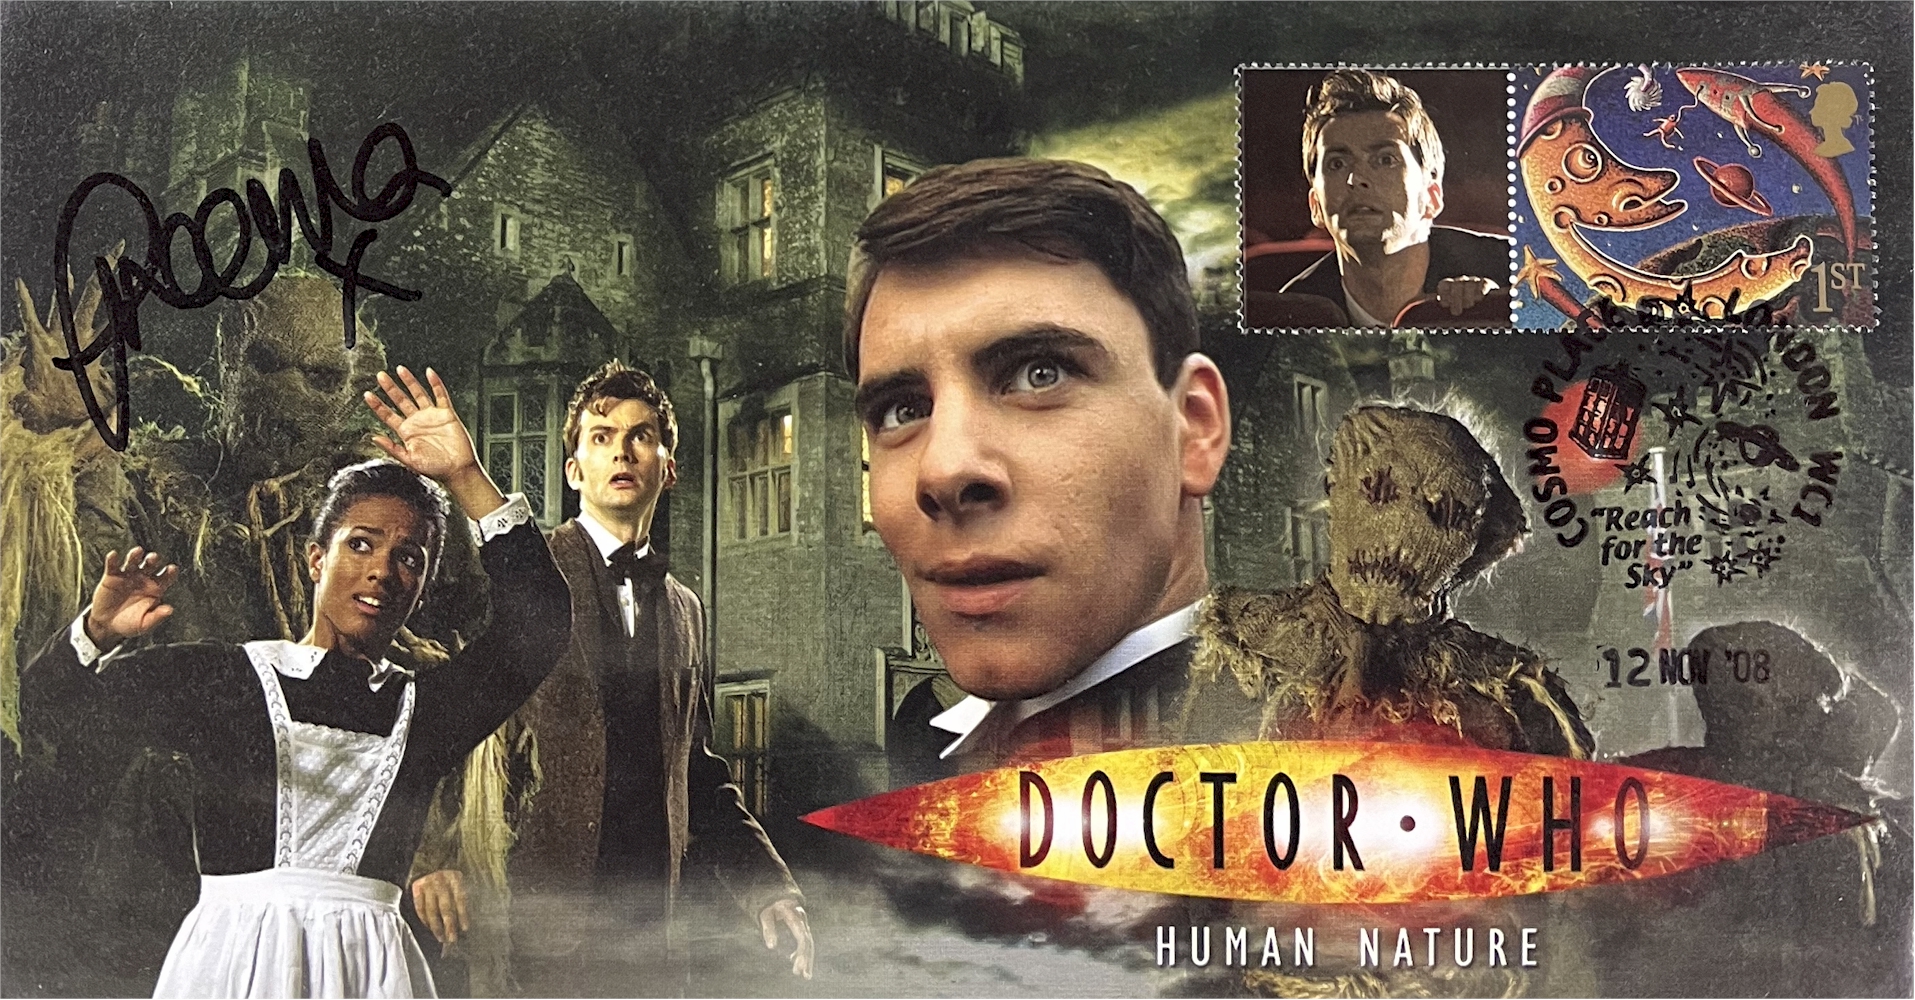 Doctor Who 2007 Series 3 Episode 8 Series Human Nature Collectible Stamp Cover Signed by FREEMA AGYEMAN